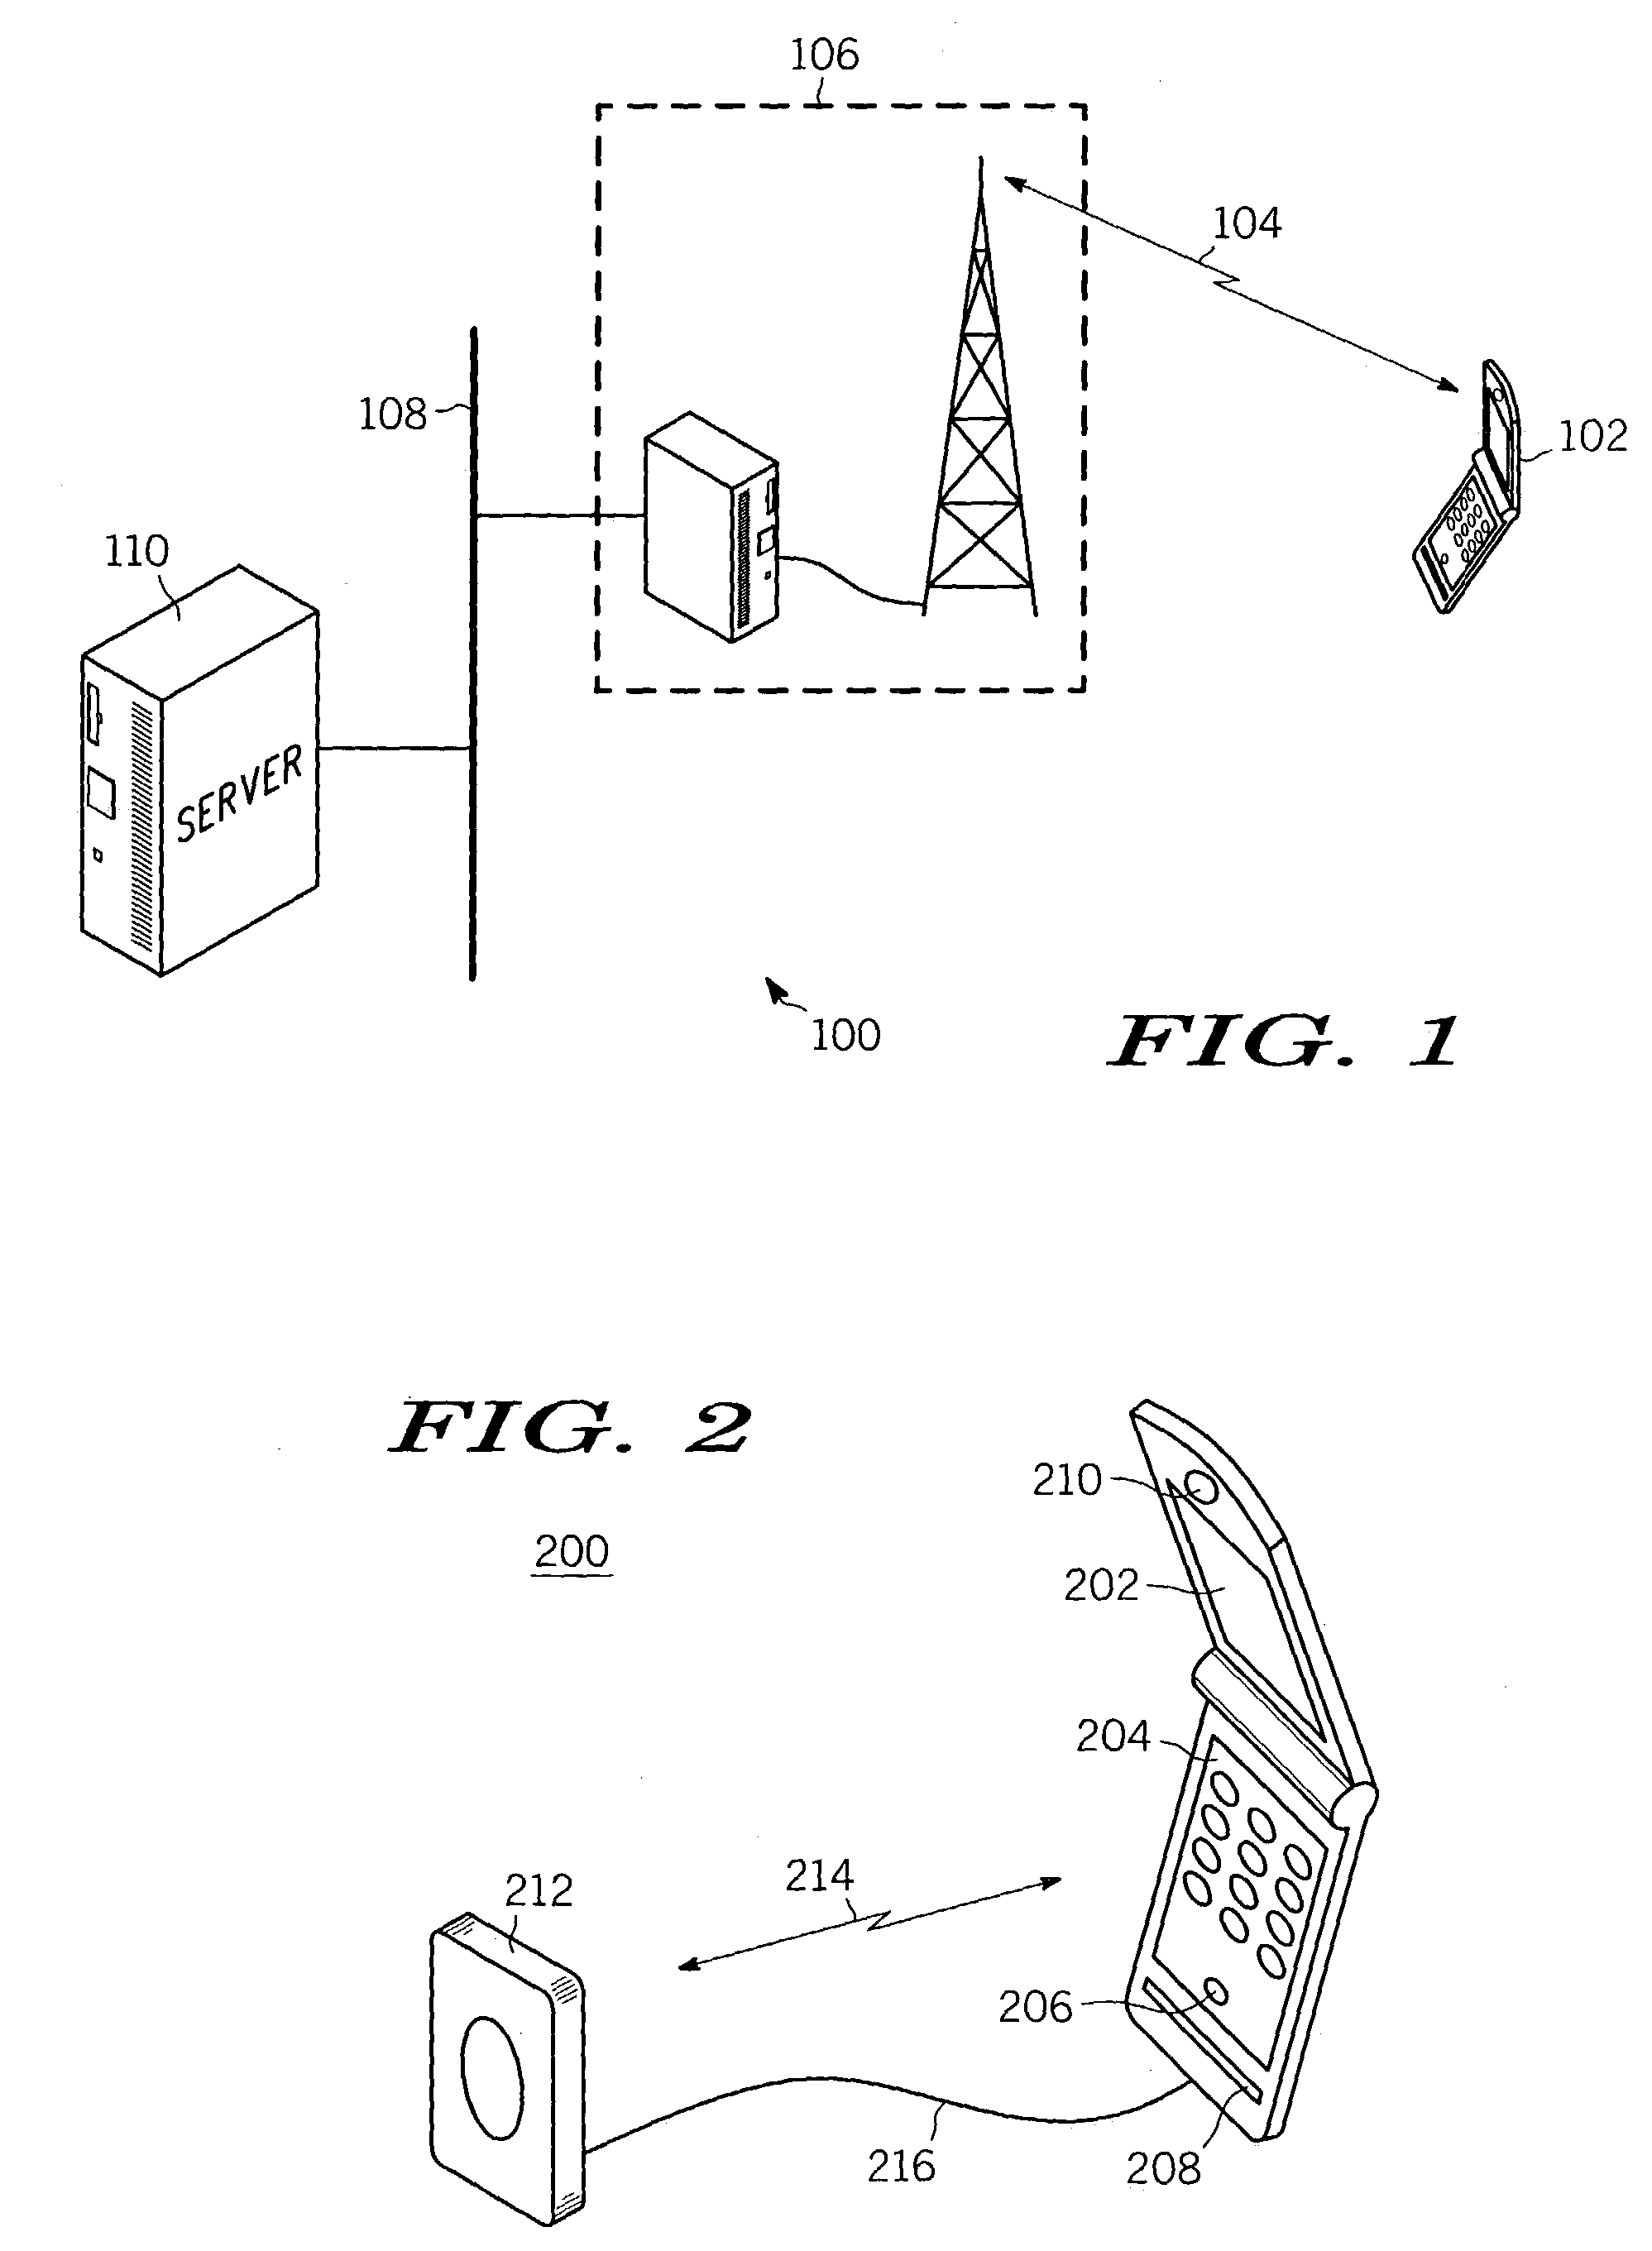 Method and apparatus using biometric sensors for controlling access to a wireless communication device